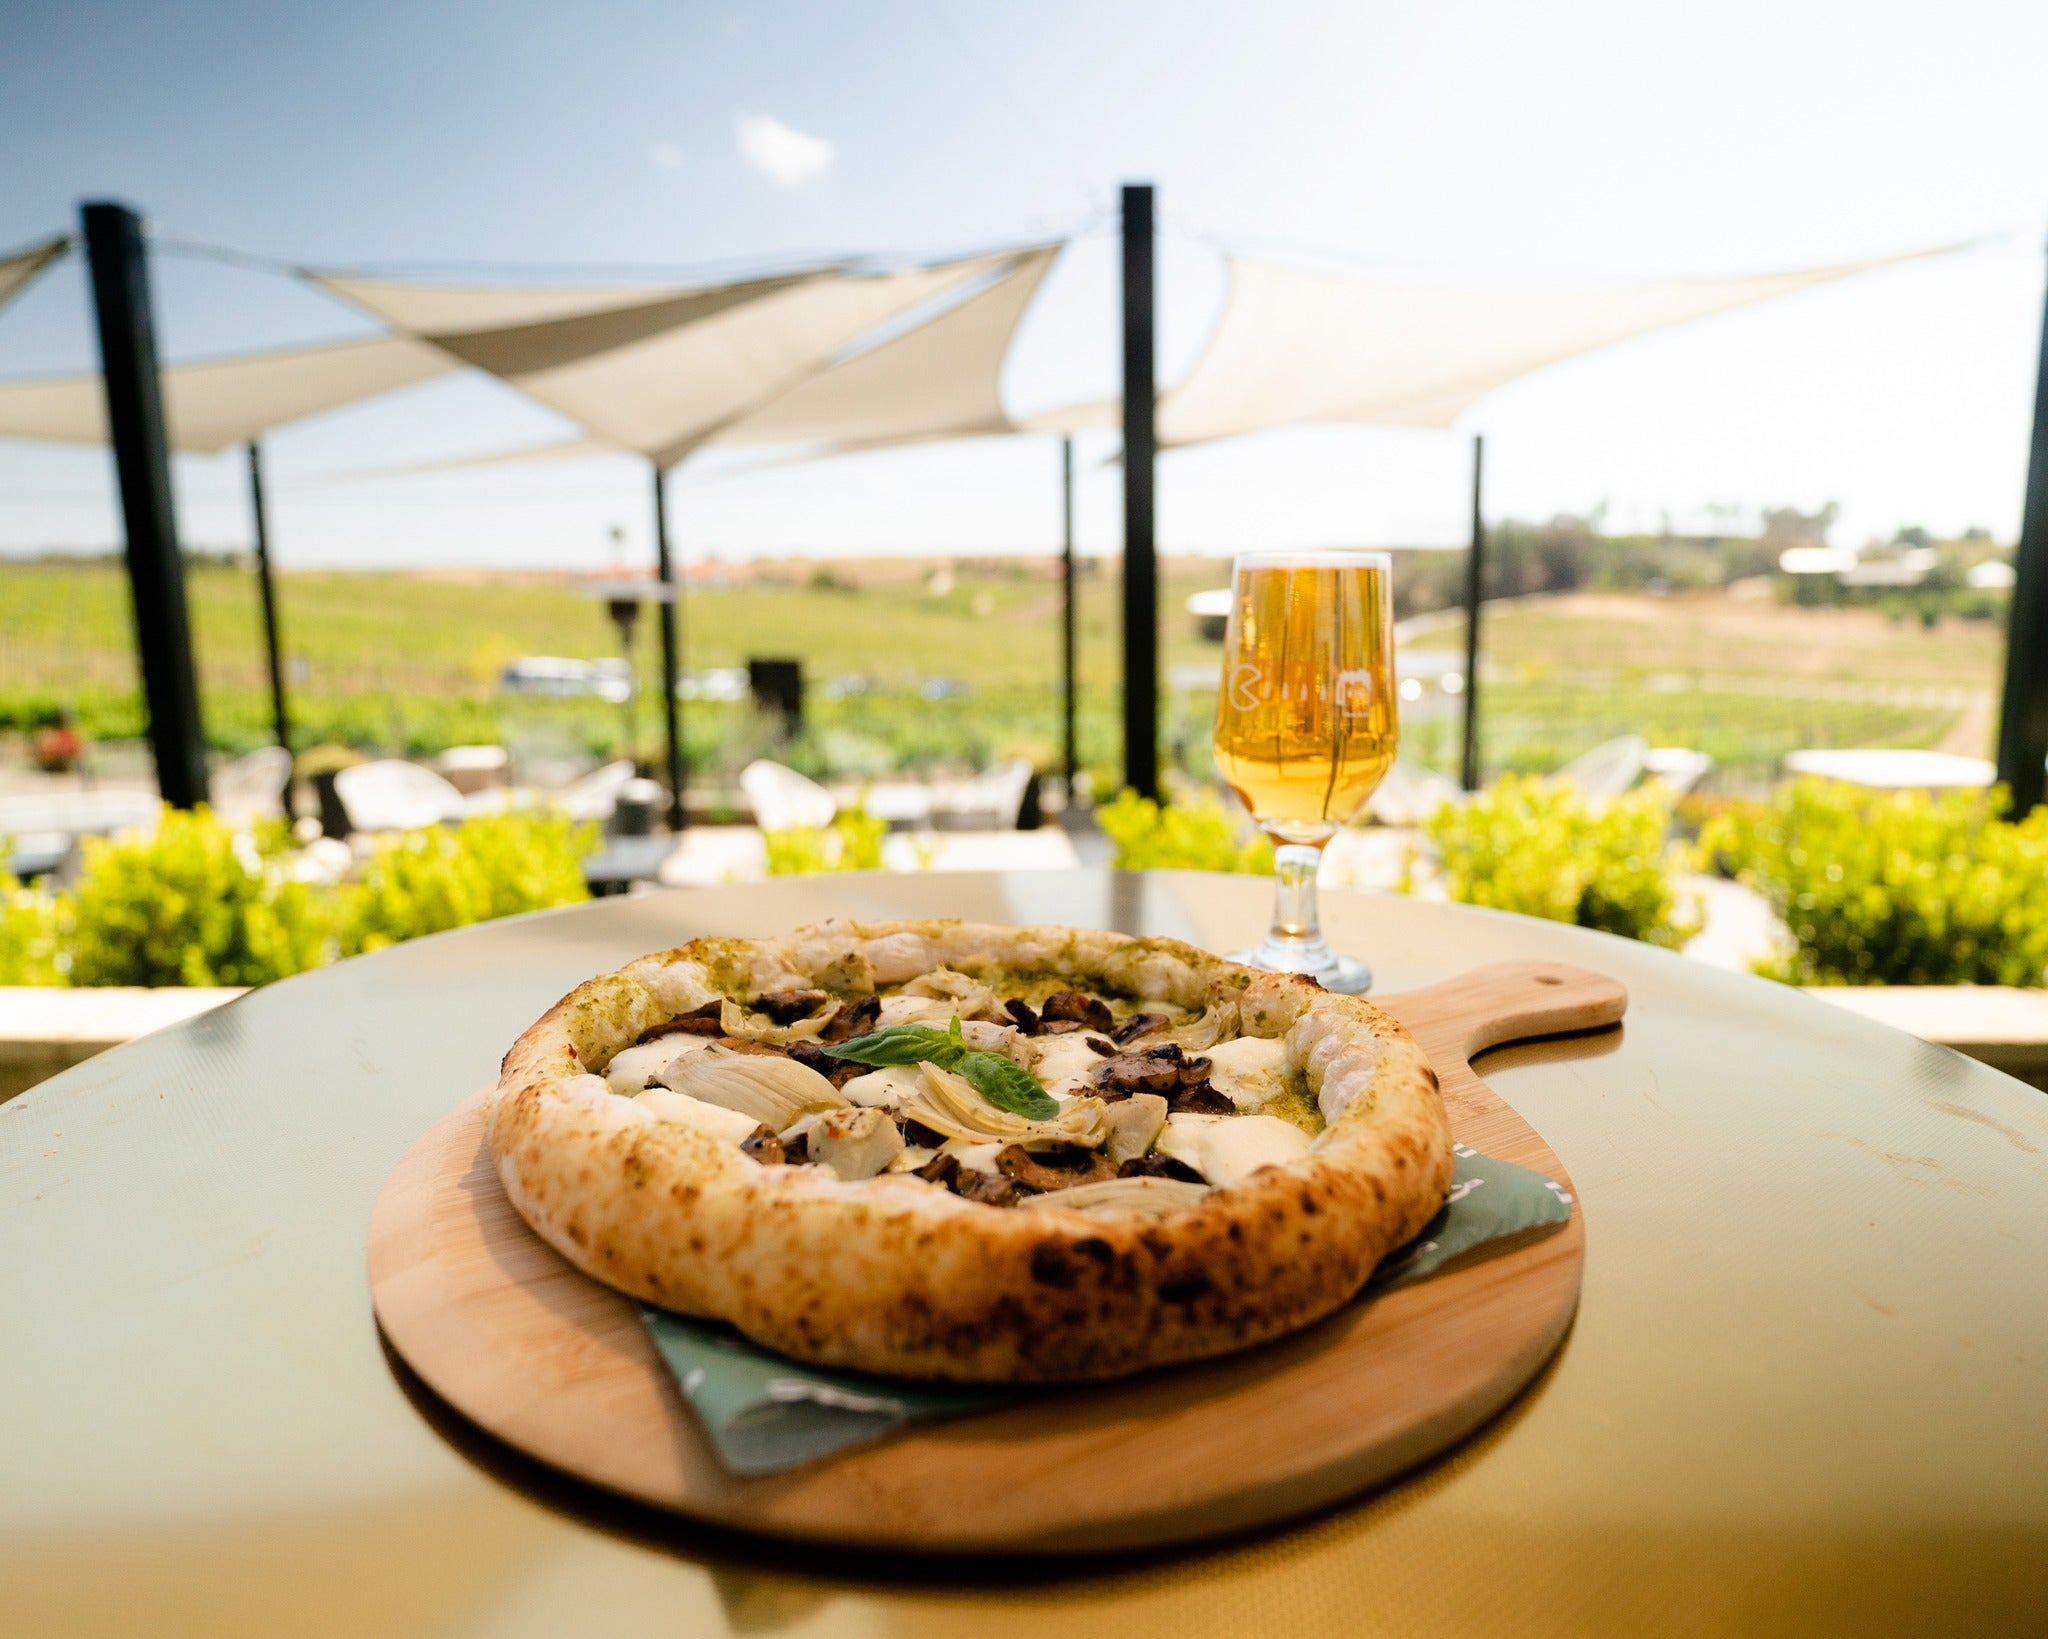 Pizza and wine outdoors at Akash Winery